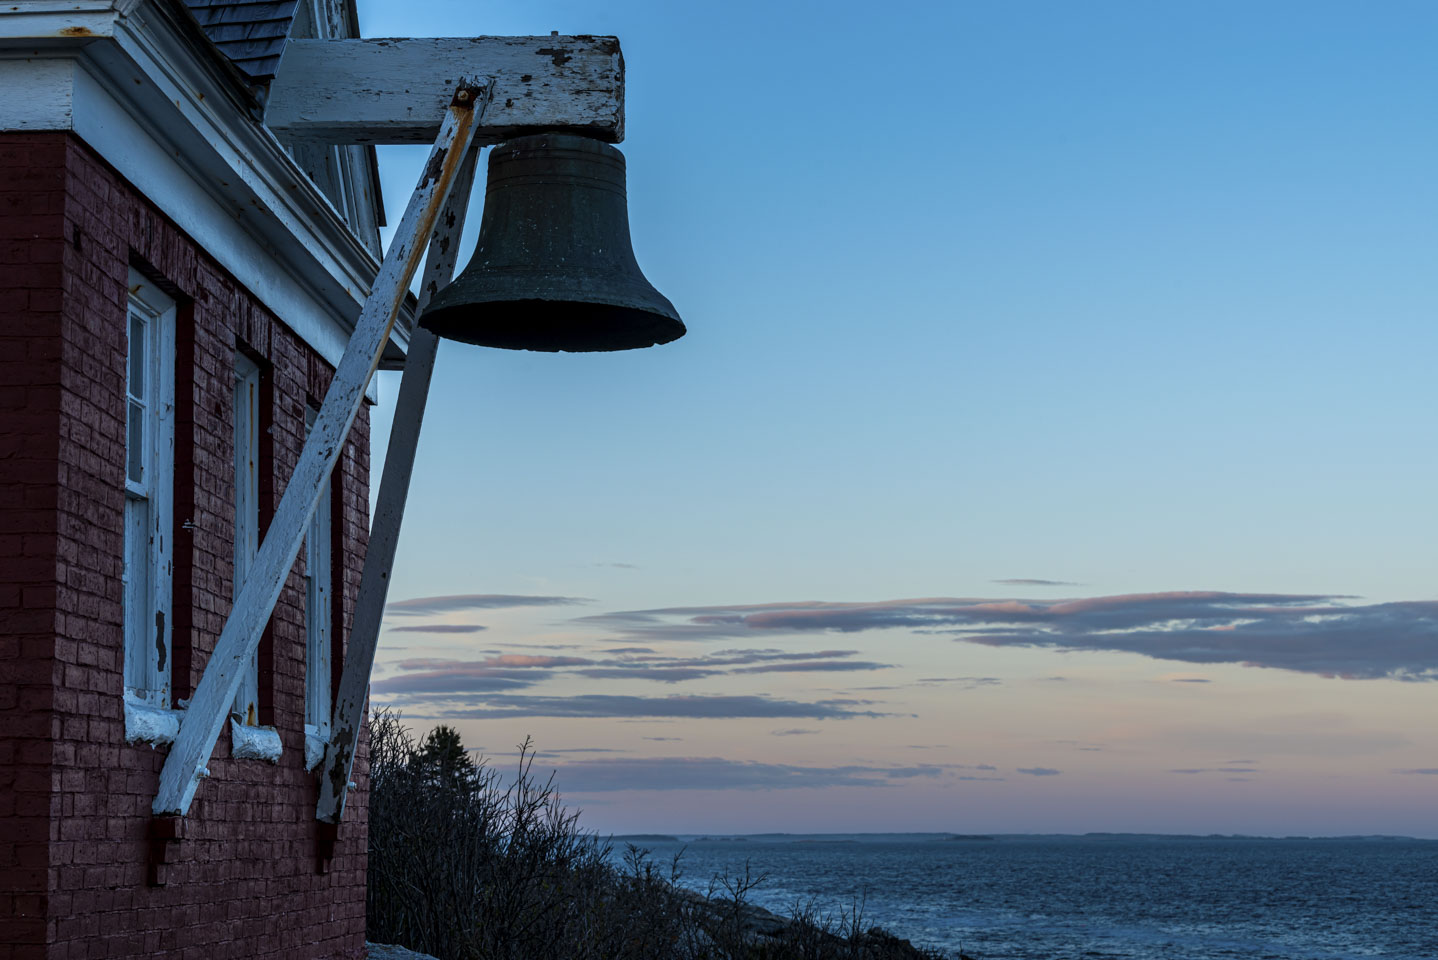 Fog bell at Pemaquid Point Lighthouse